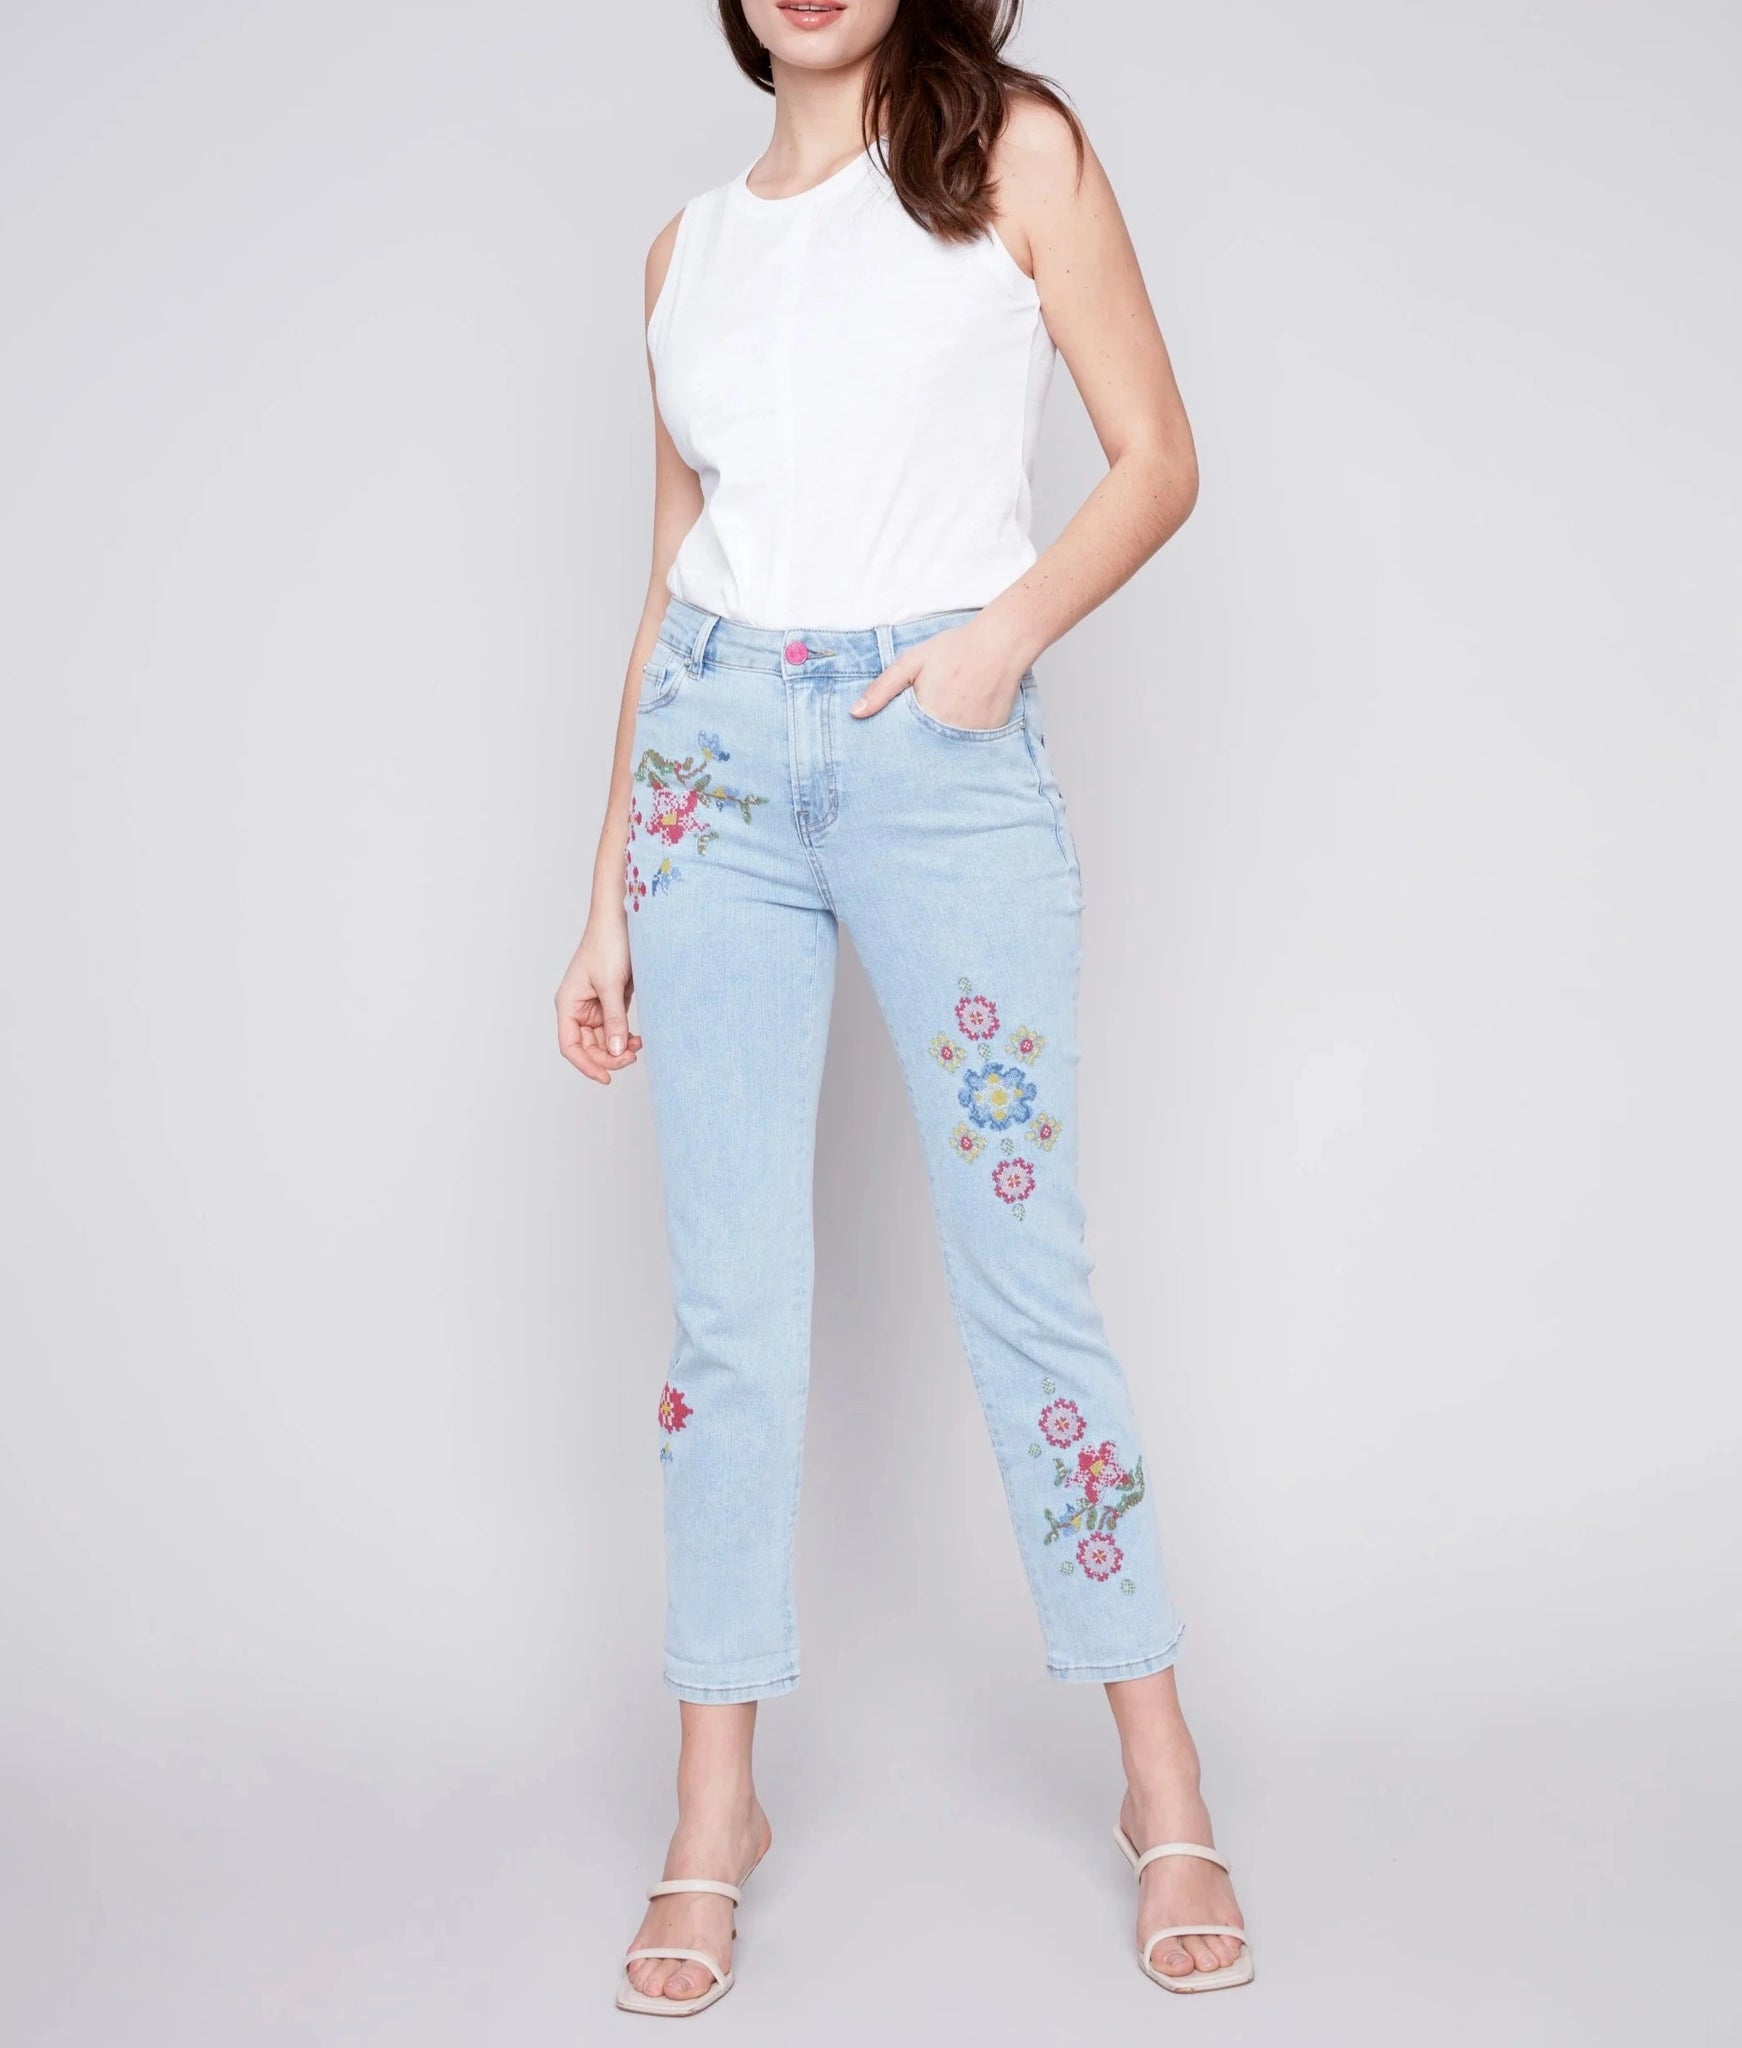 Cross Stitch Embroidered Jeans | Bleach Blue